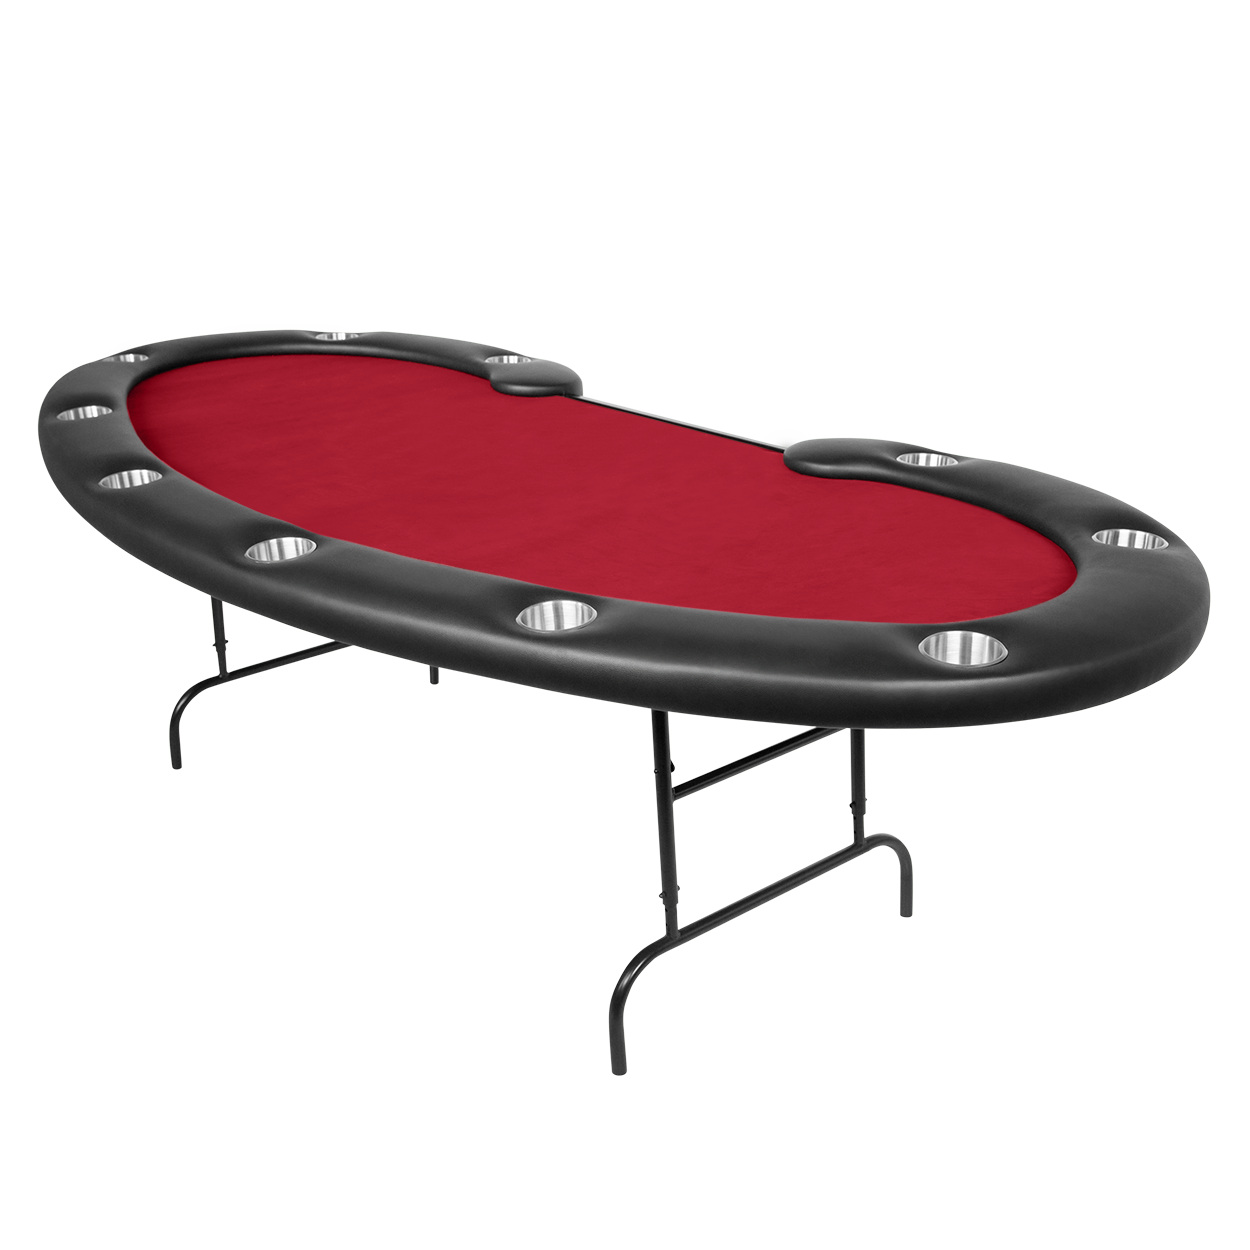 Kidney shaped folding poker table with red velveteen game top.